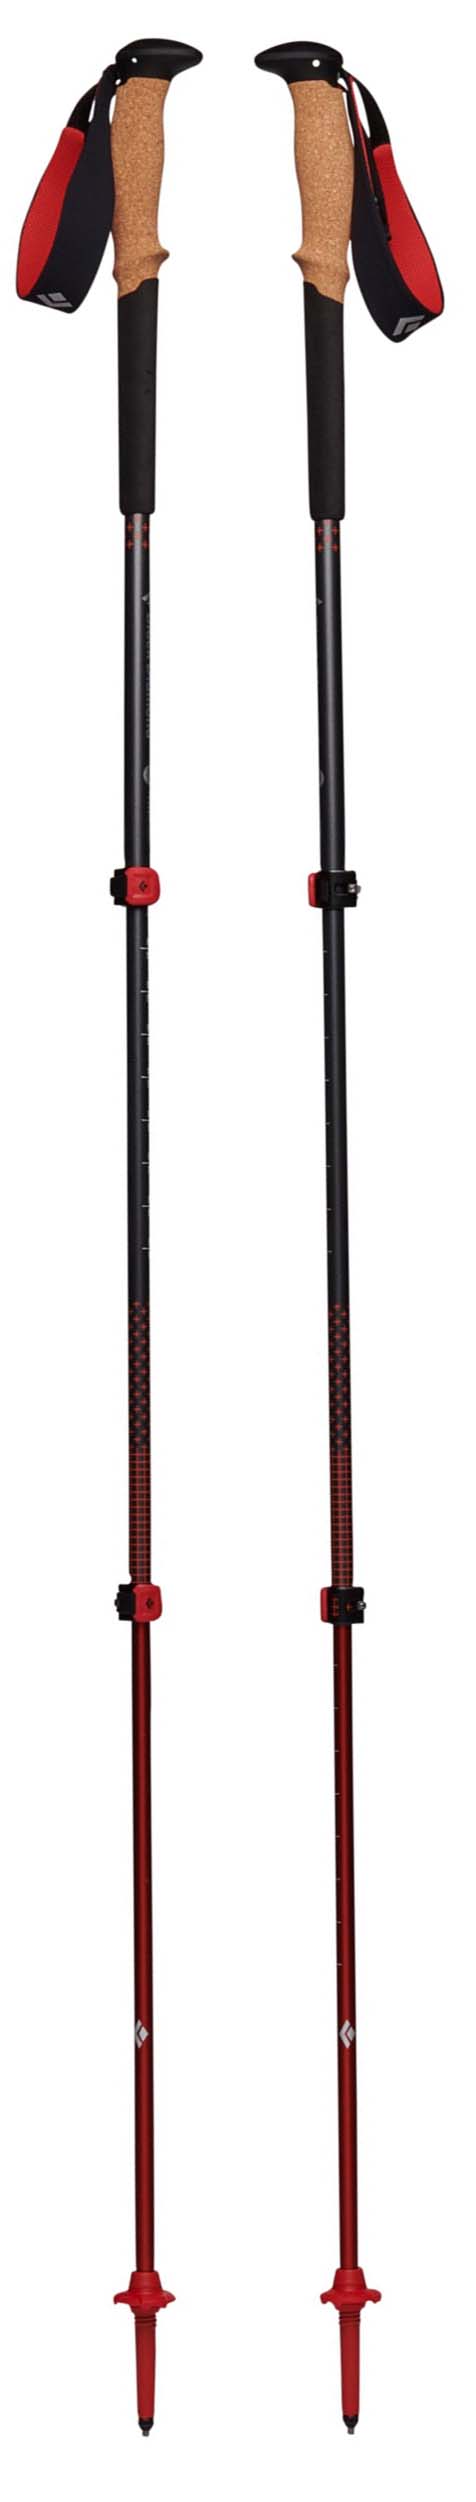 Crown Sporting Goods Shock-Resistant Adjustable Trekking Pole and Hiking  Staff (Set of 2)